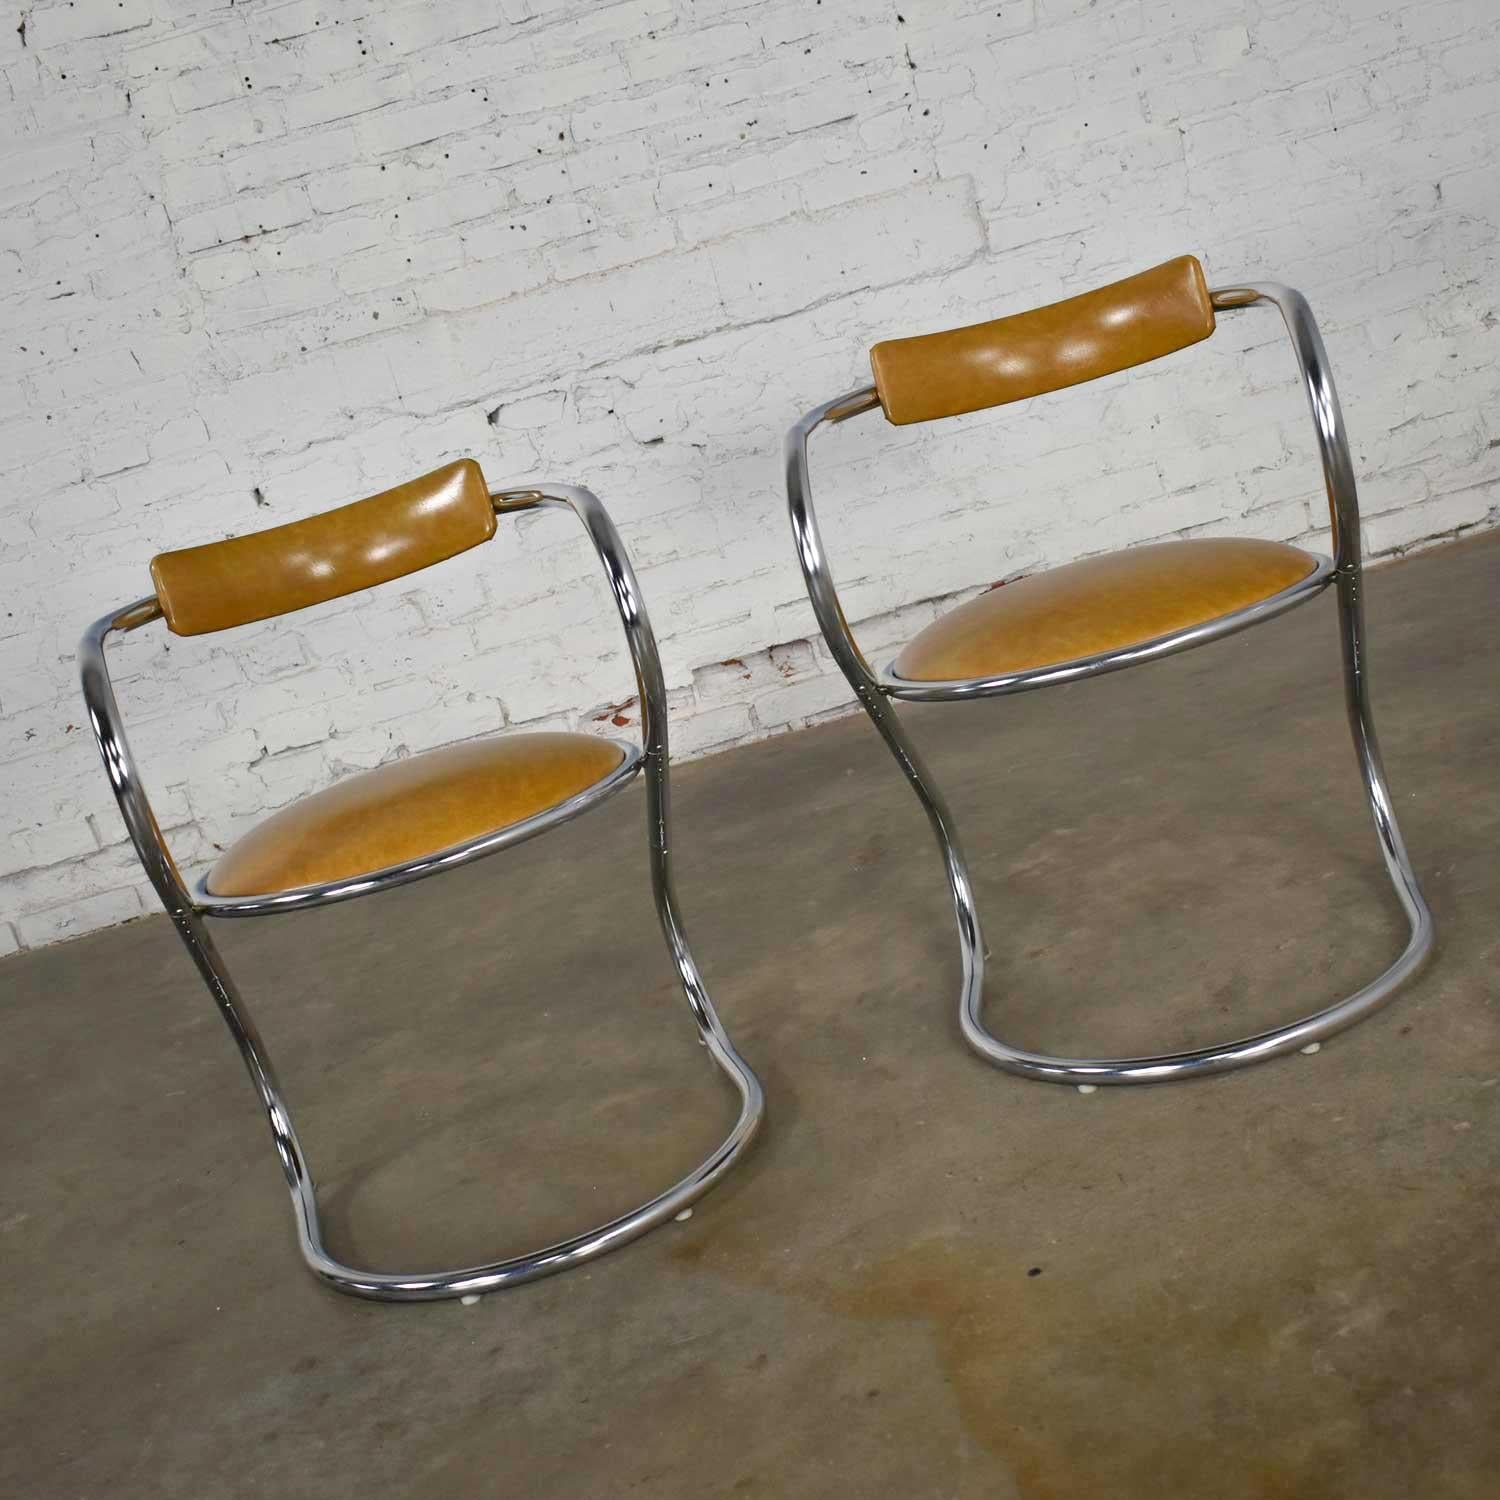 Handsome pair of streamlined reversed cantilever chairs comprised of chrome frames and gold faux leather or vinyl by Sutton Bridge, a division of Etowah Manufacturing Co. Inc. Beautiful condition with no outstanding flaws that we have detected. Only